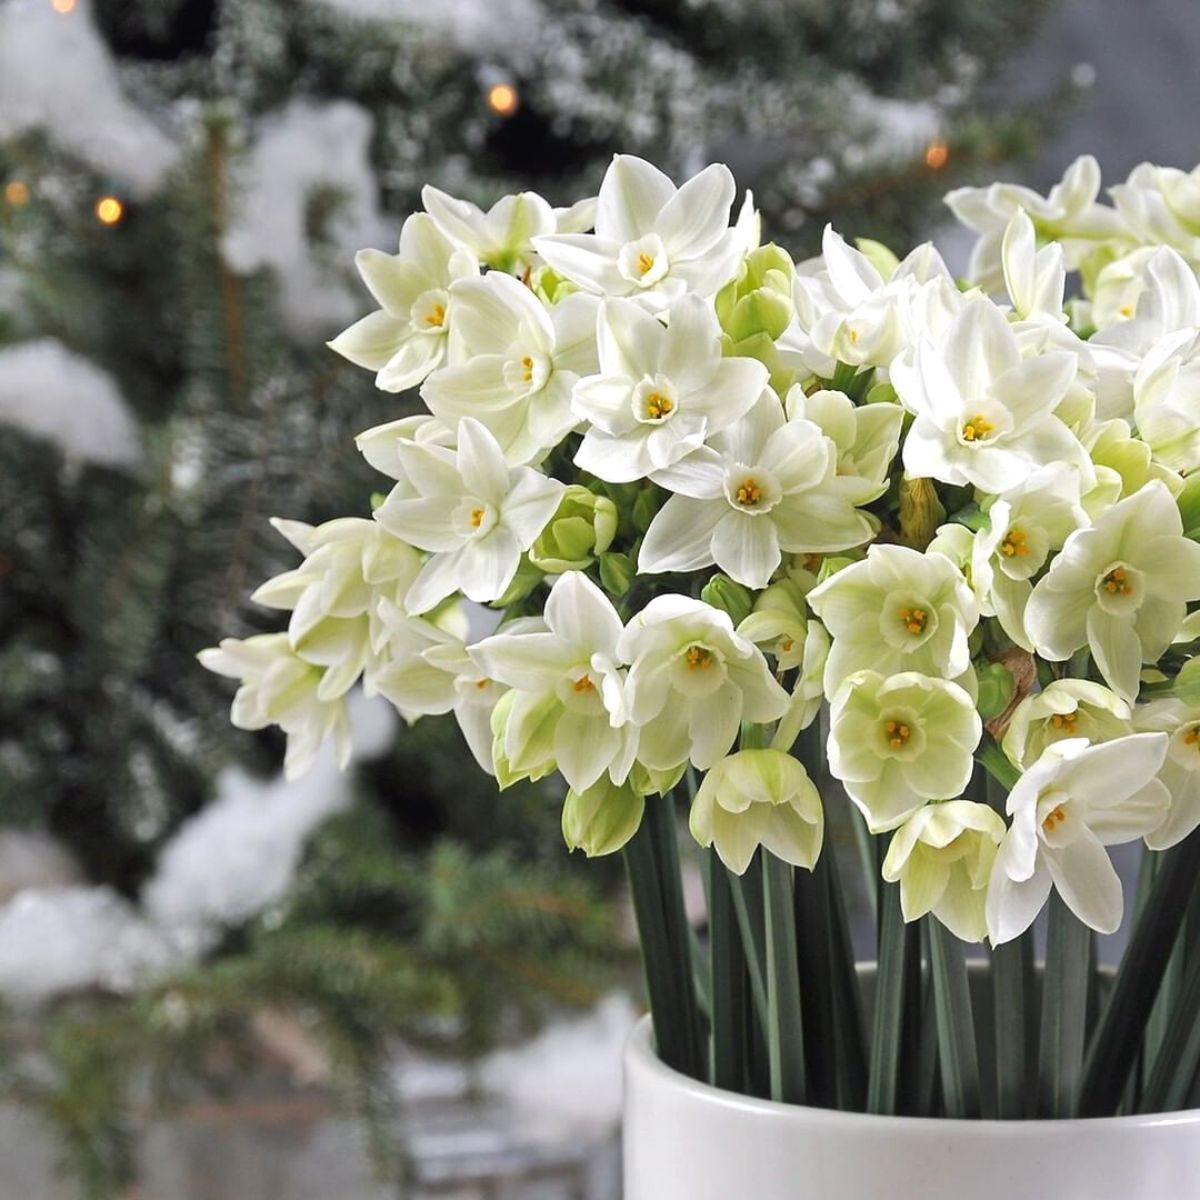 Narcissus paperwhite flowers for Christmas